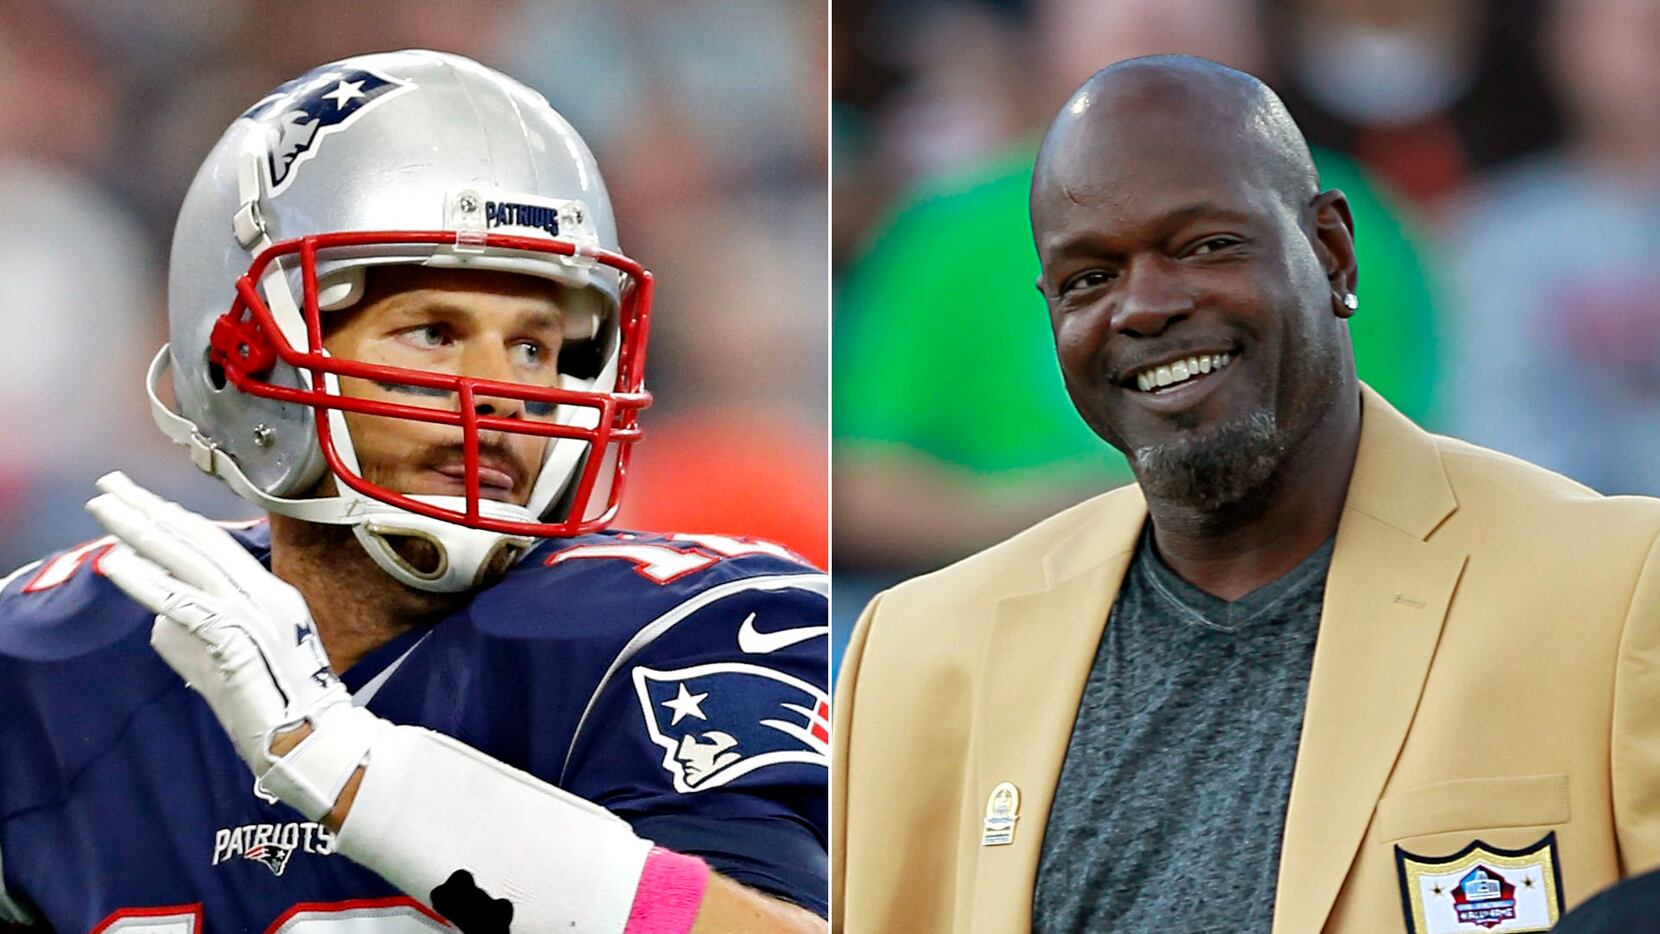 Former Cowboys RB Emmitt Smith had some words of wisdom for Tom